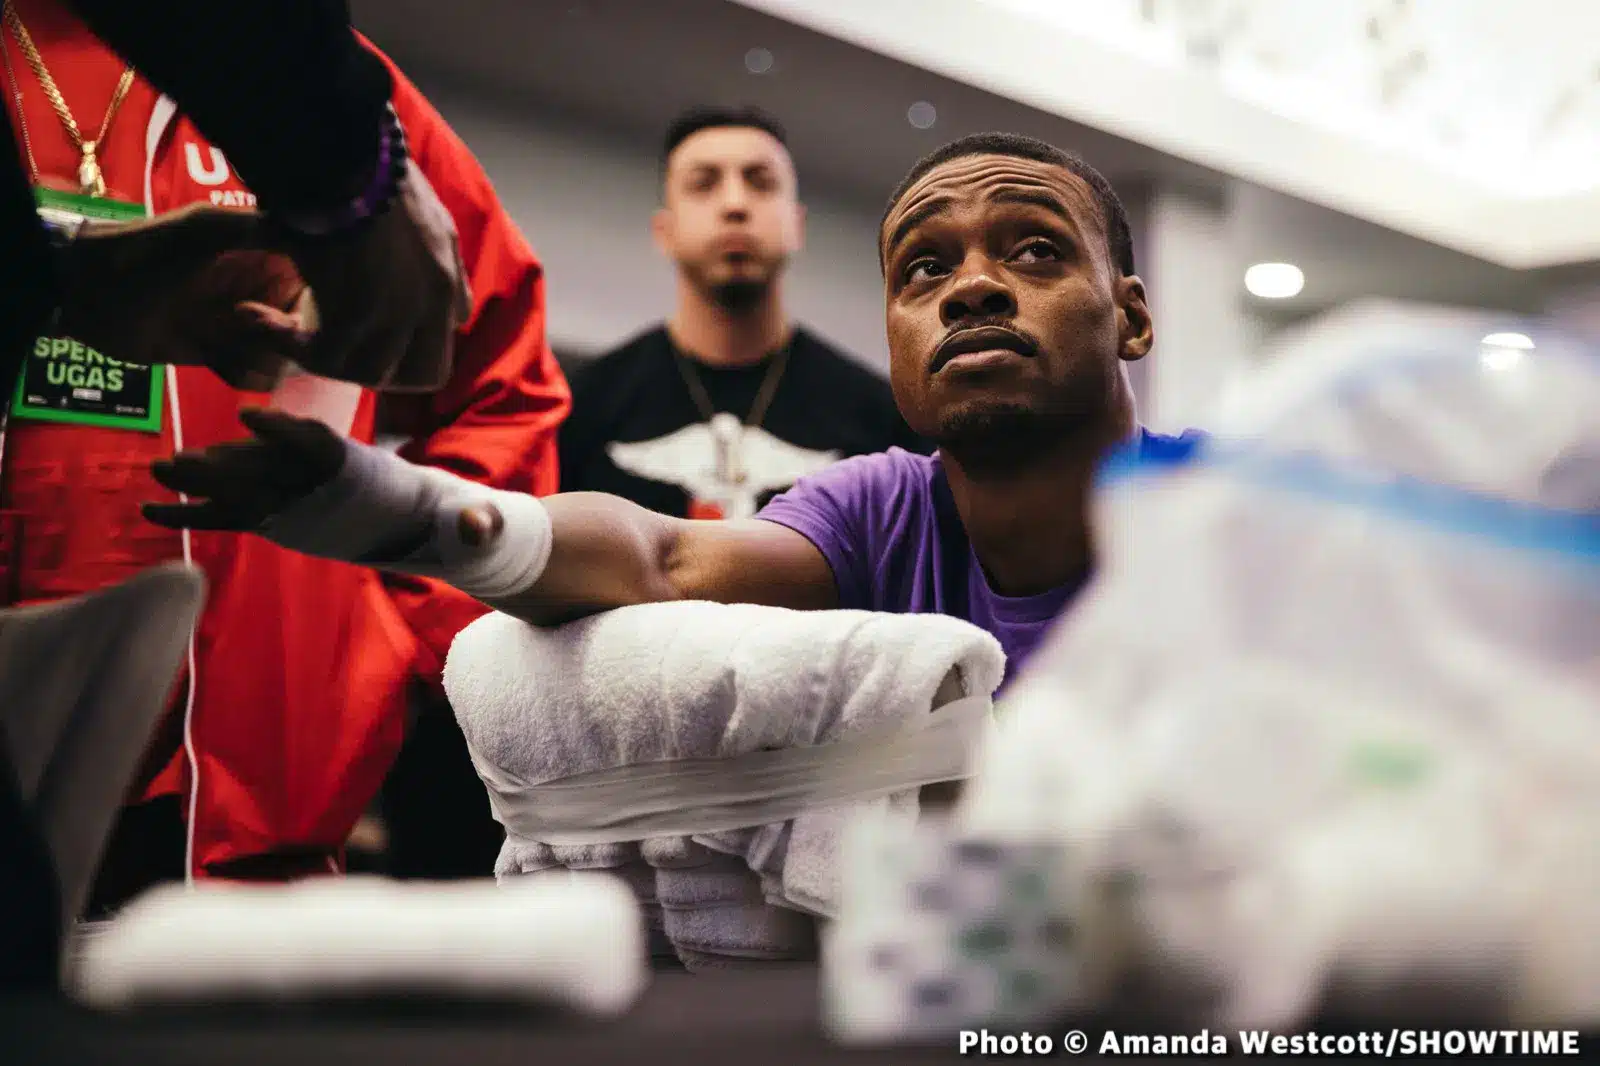 Image: Stephen Espinoza gives update on Spence vs. Crawford